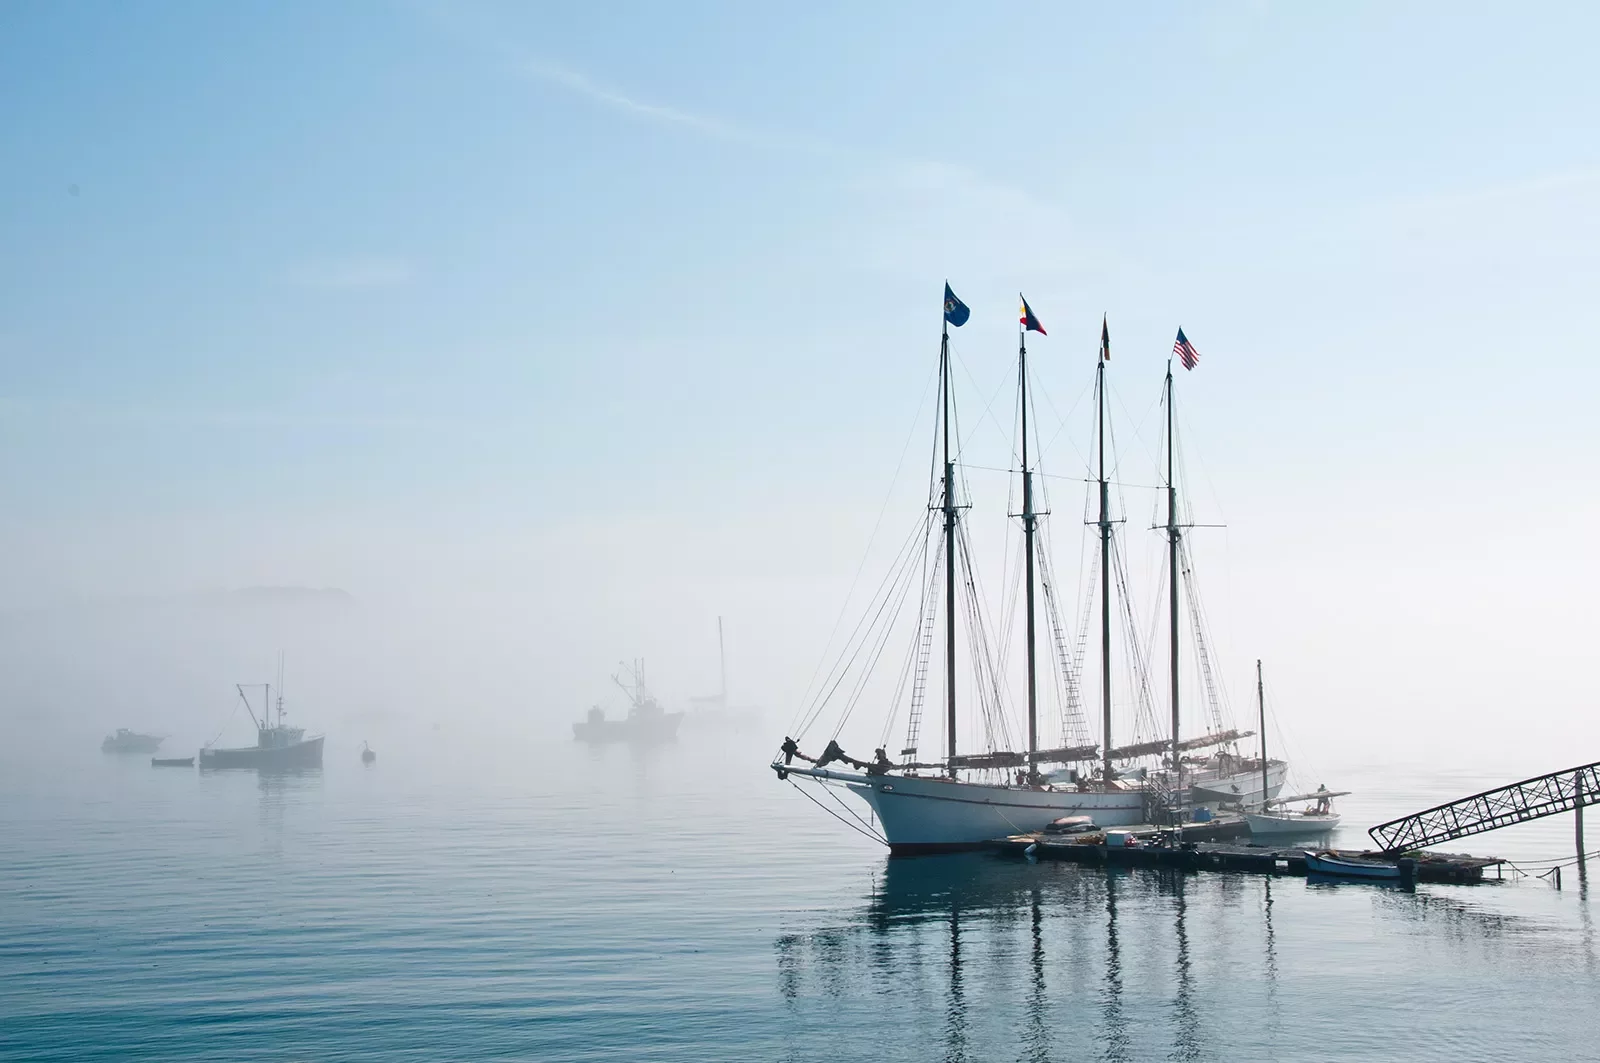 Wide shot of a four-masted ship in port, fog on the horizon.